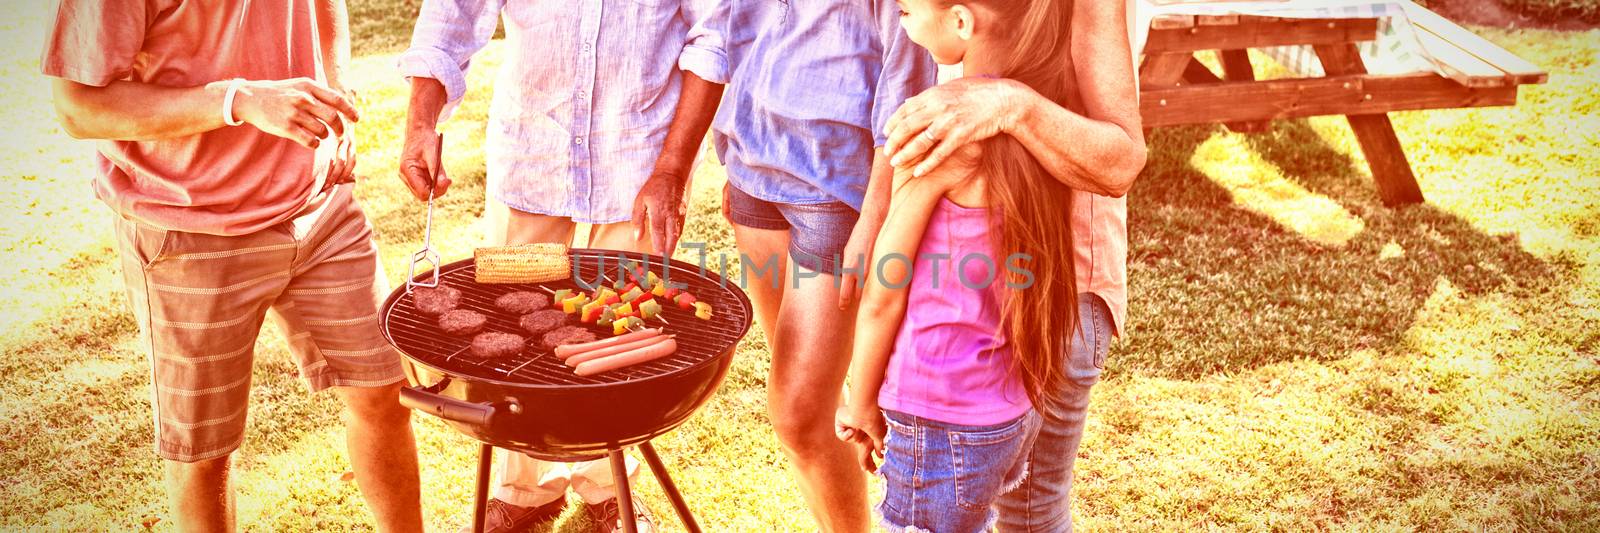 Family talking while preparing barbecue in the park by Wavebreakmedia